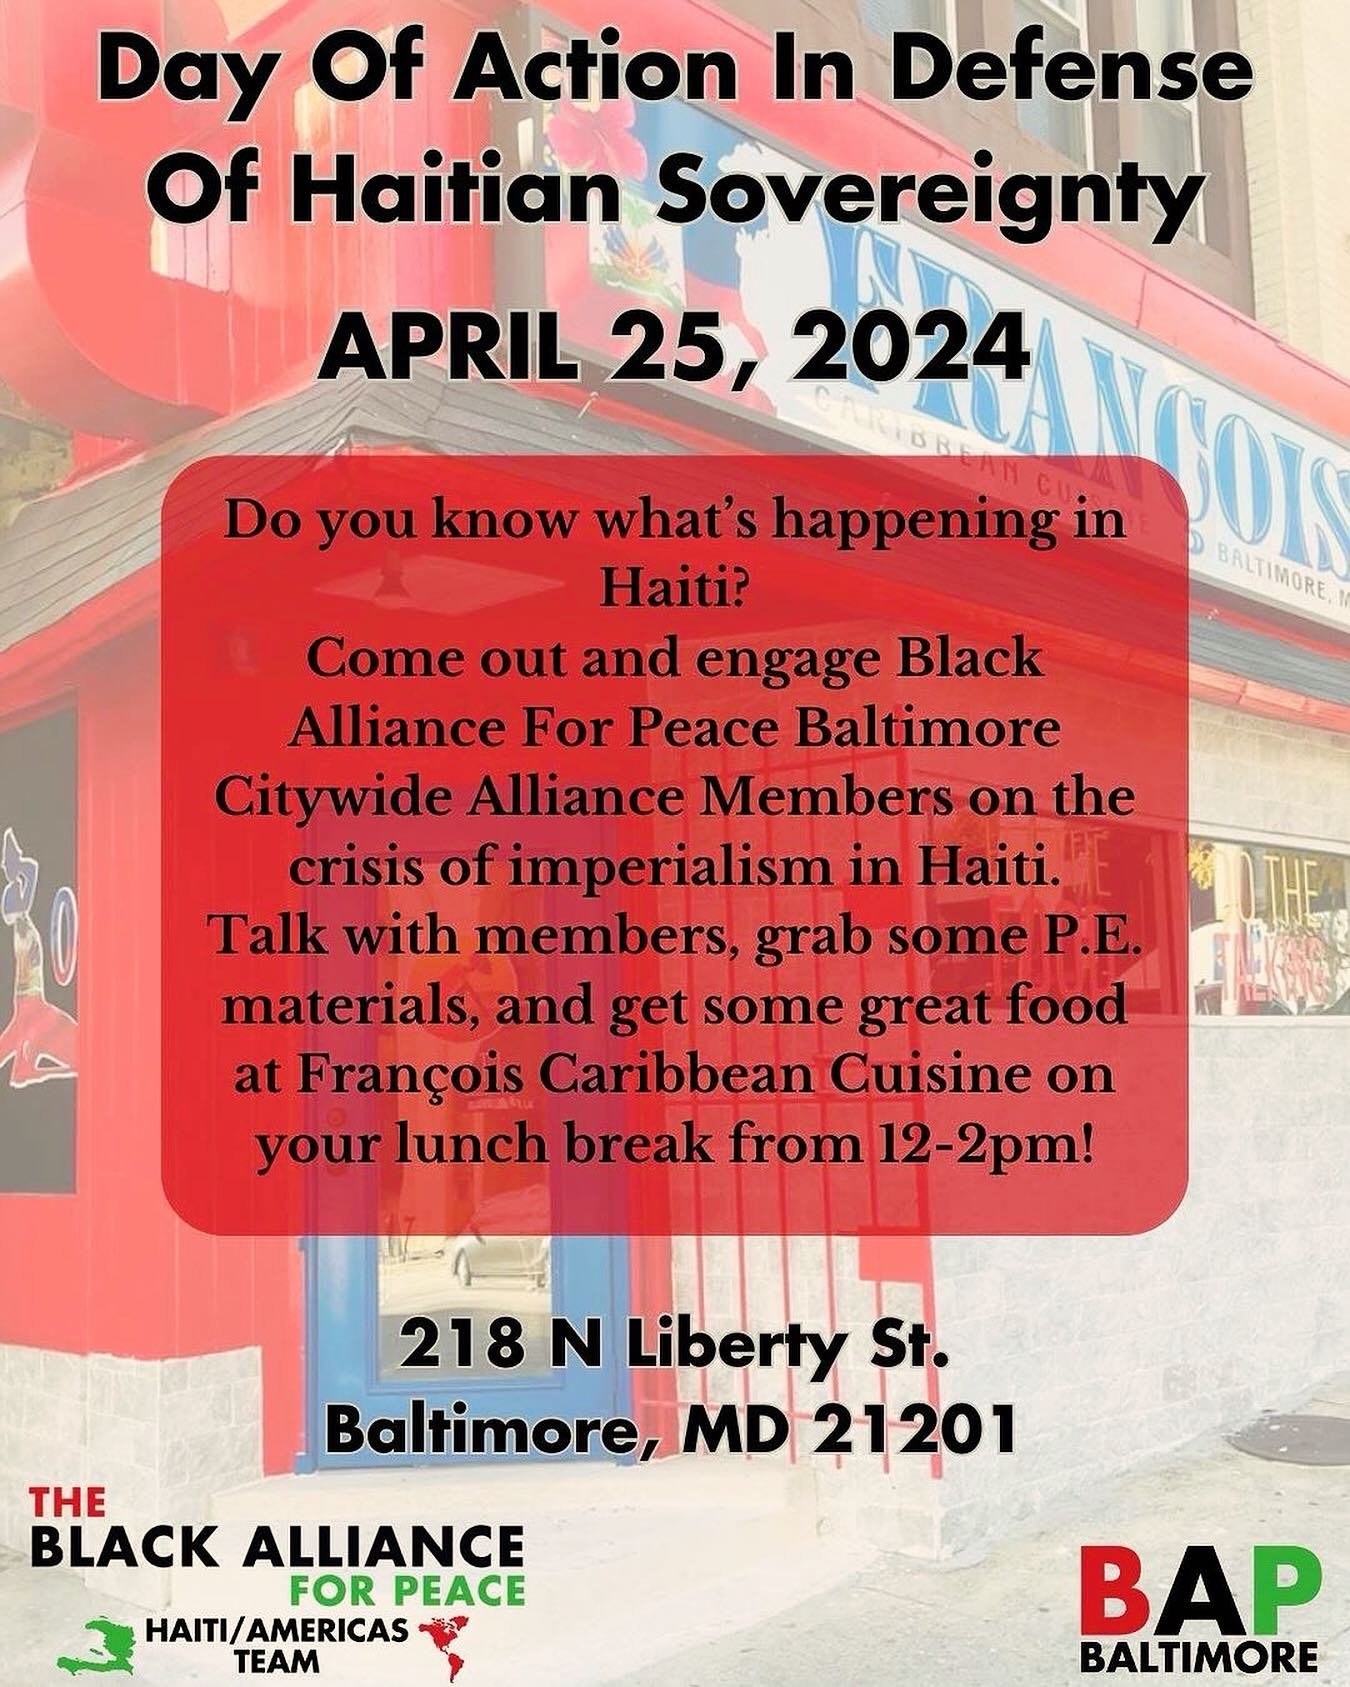 Baltimore 👉🏿👉🏿👉🏿&bull; @blackallianceforpeace 🔊DAY OF ACTION FOR HAITI🇭🇹
On April 25th, come out to Francois Caribbean Cuisine from 12-2pm and engage @bap_baltimore citywide alliance on what&rsquo;s happening in Haiti!
Come pick up palm card